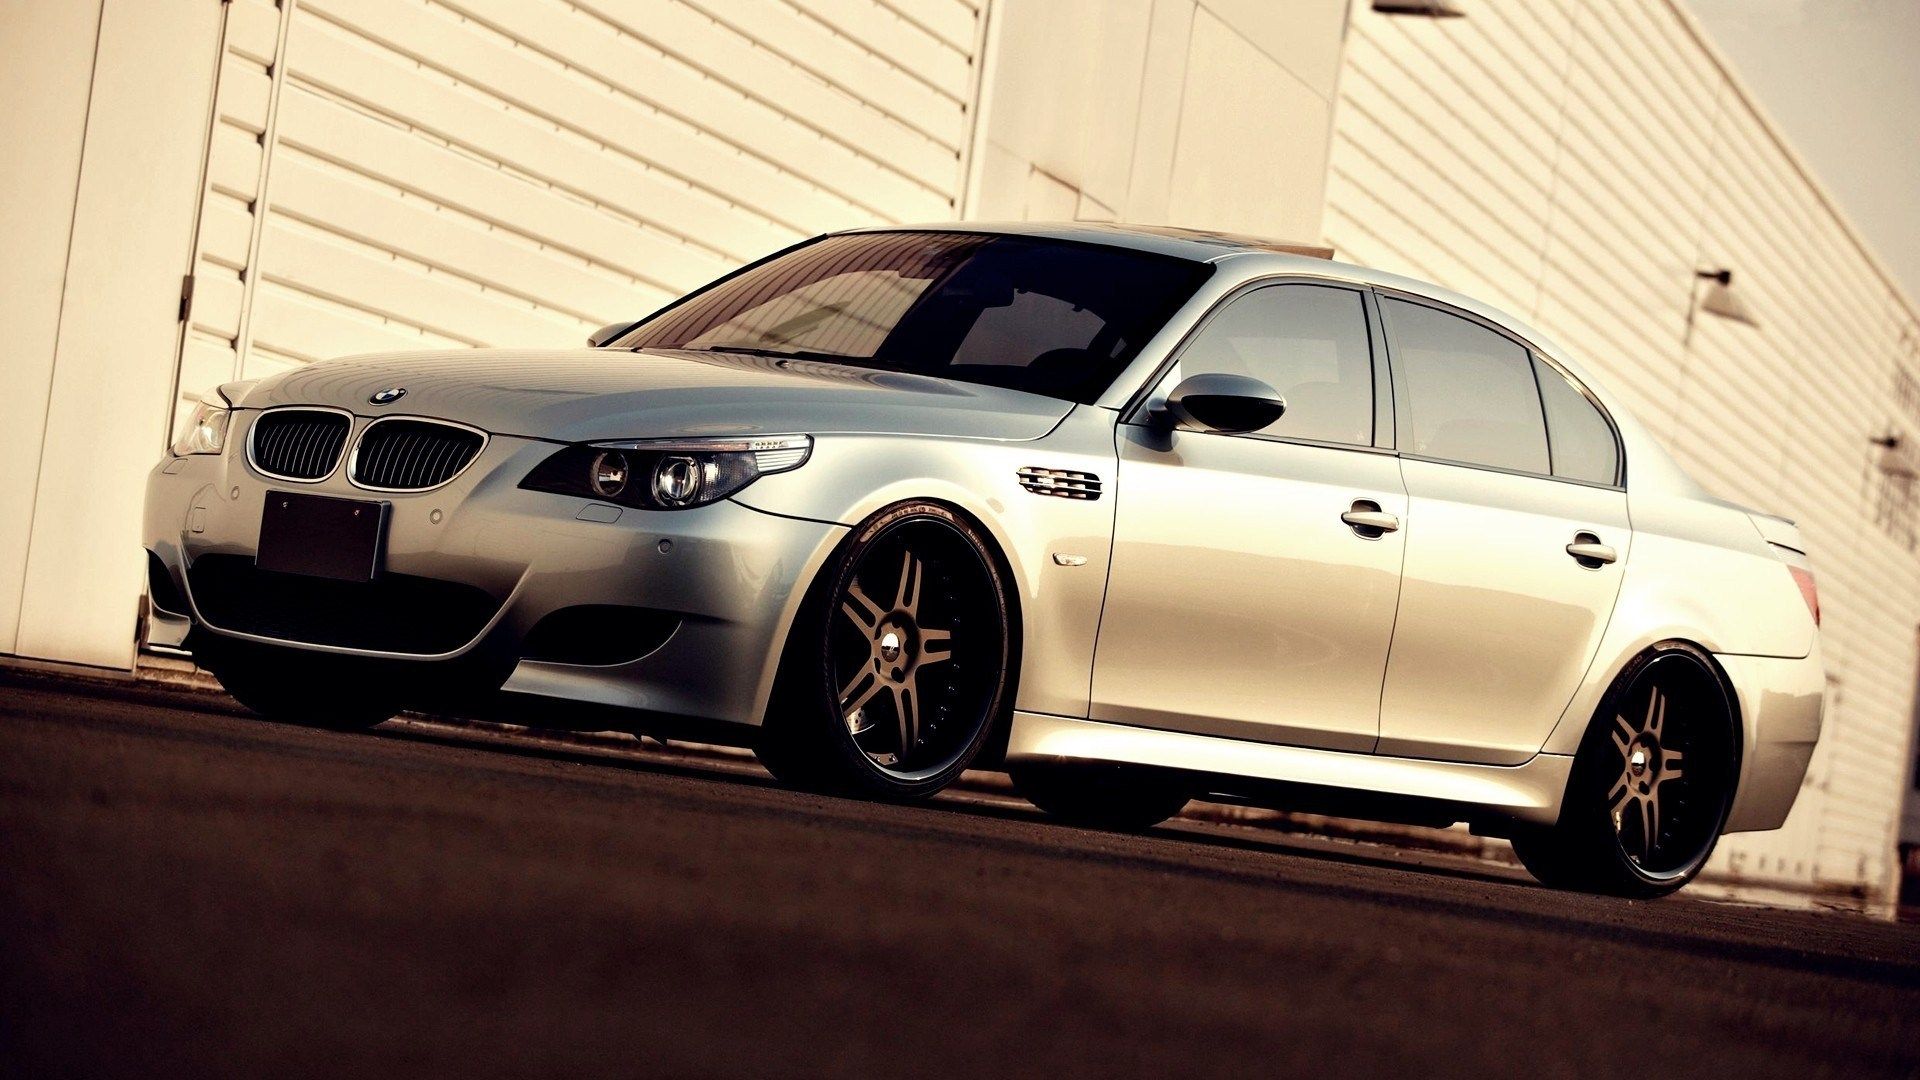 Topic For Bmw M5 E60 Wallpaper 1920x1080, Bmw E60 Wallpaper 28 Image On Genchi Info M5 1920x1080. Halo Ryanmartinproductions Com Black Cars Tuning Garages Parking Lot 1920x1080